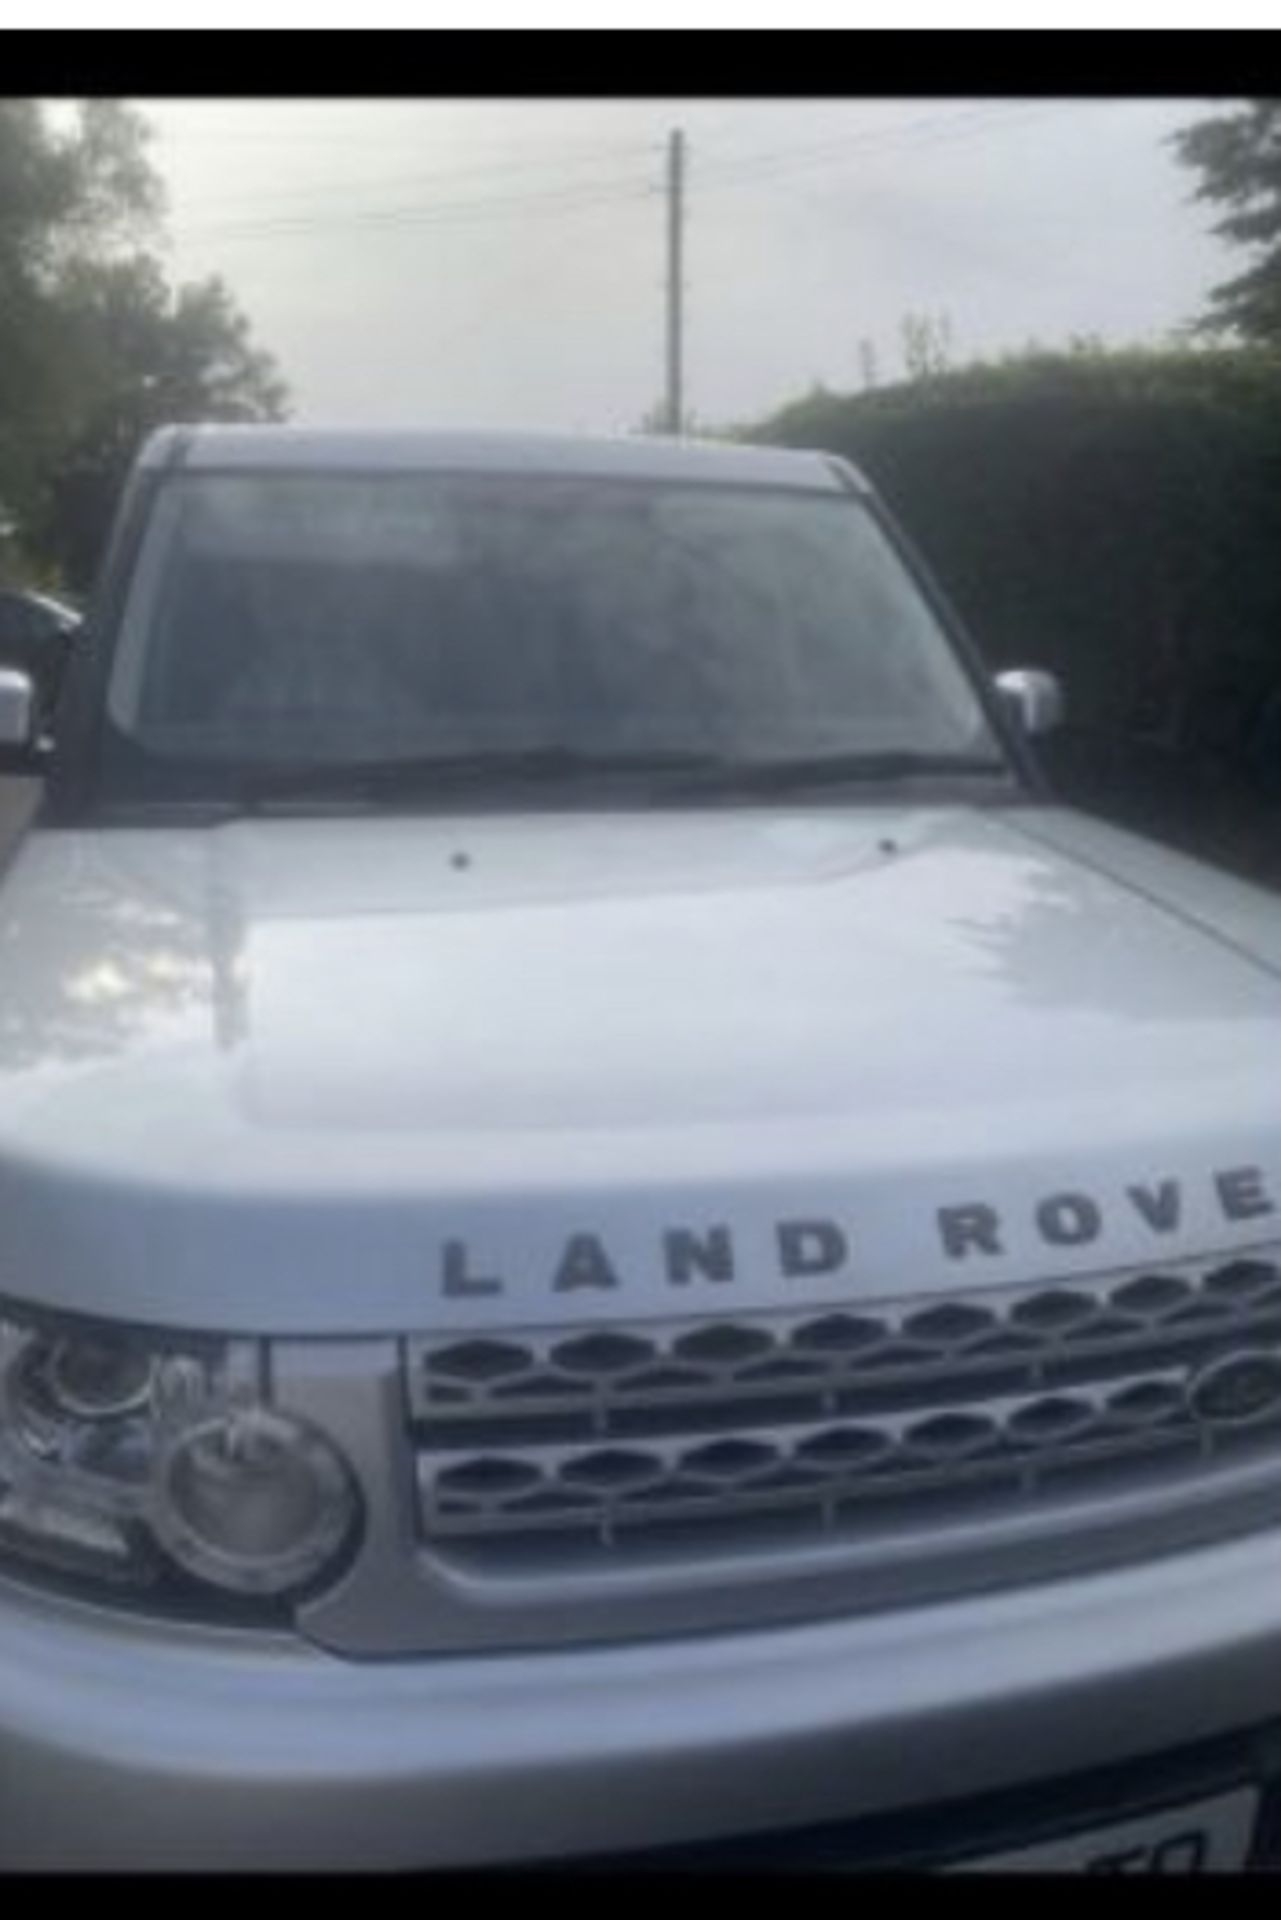 2012 LAND ROVER DISCOVERY4 DIESEL AUTOMATIC.LOCATION NORTHERN IRELAND. - Image 4 of 4